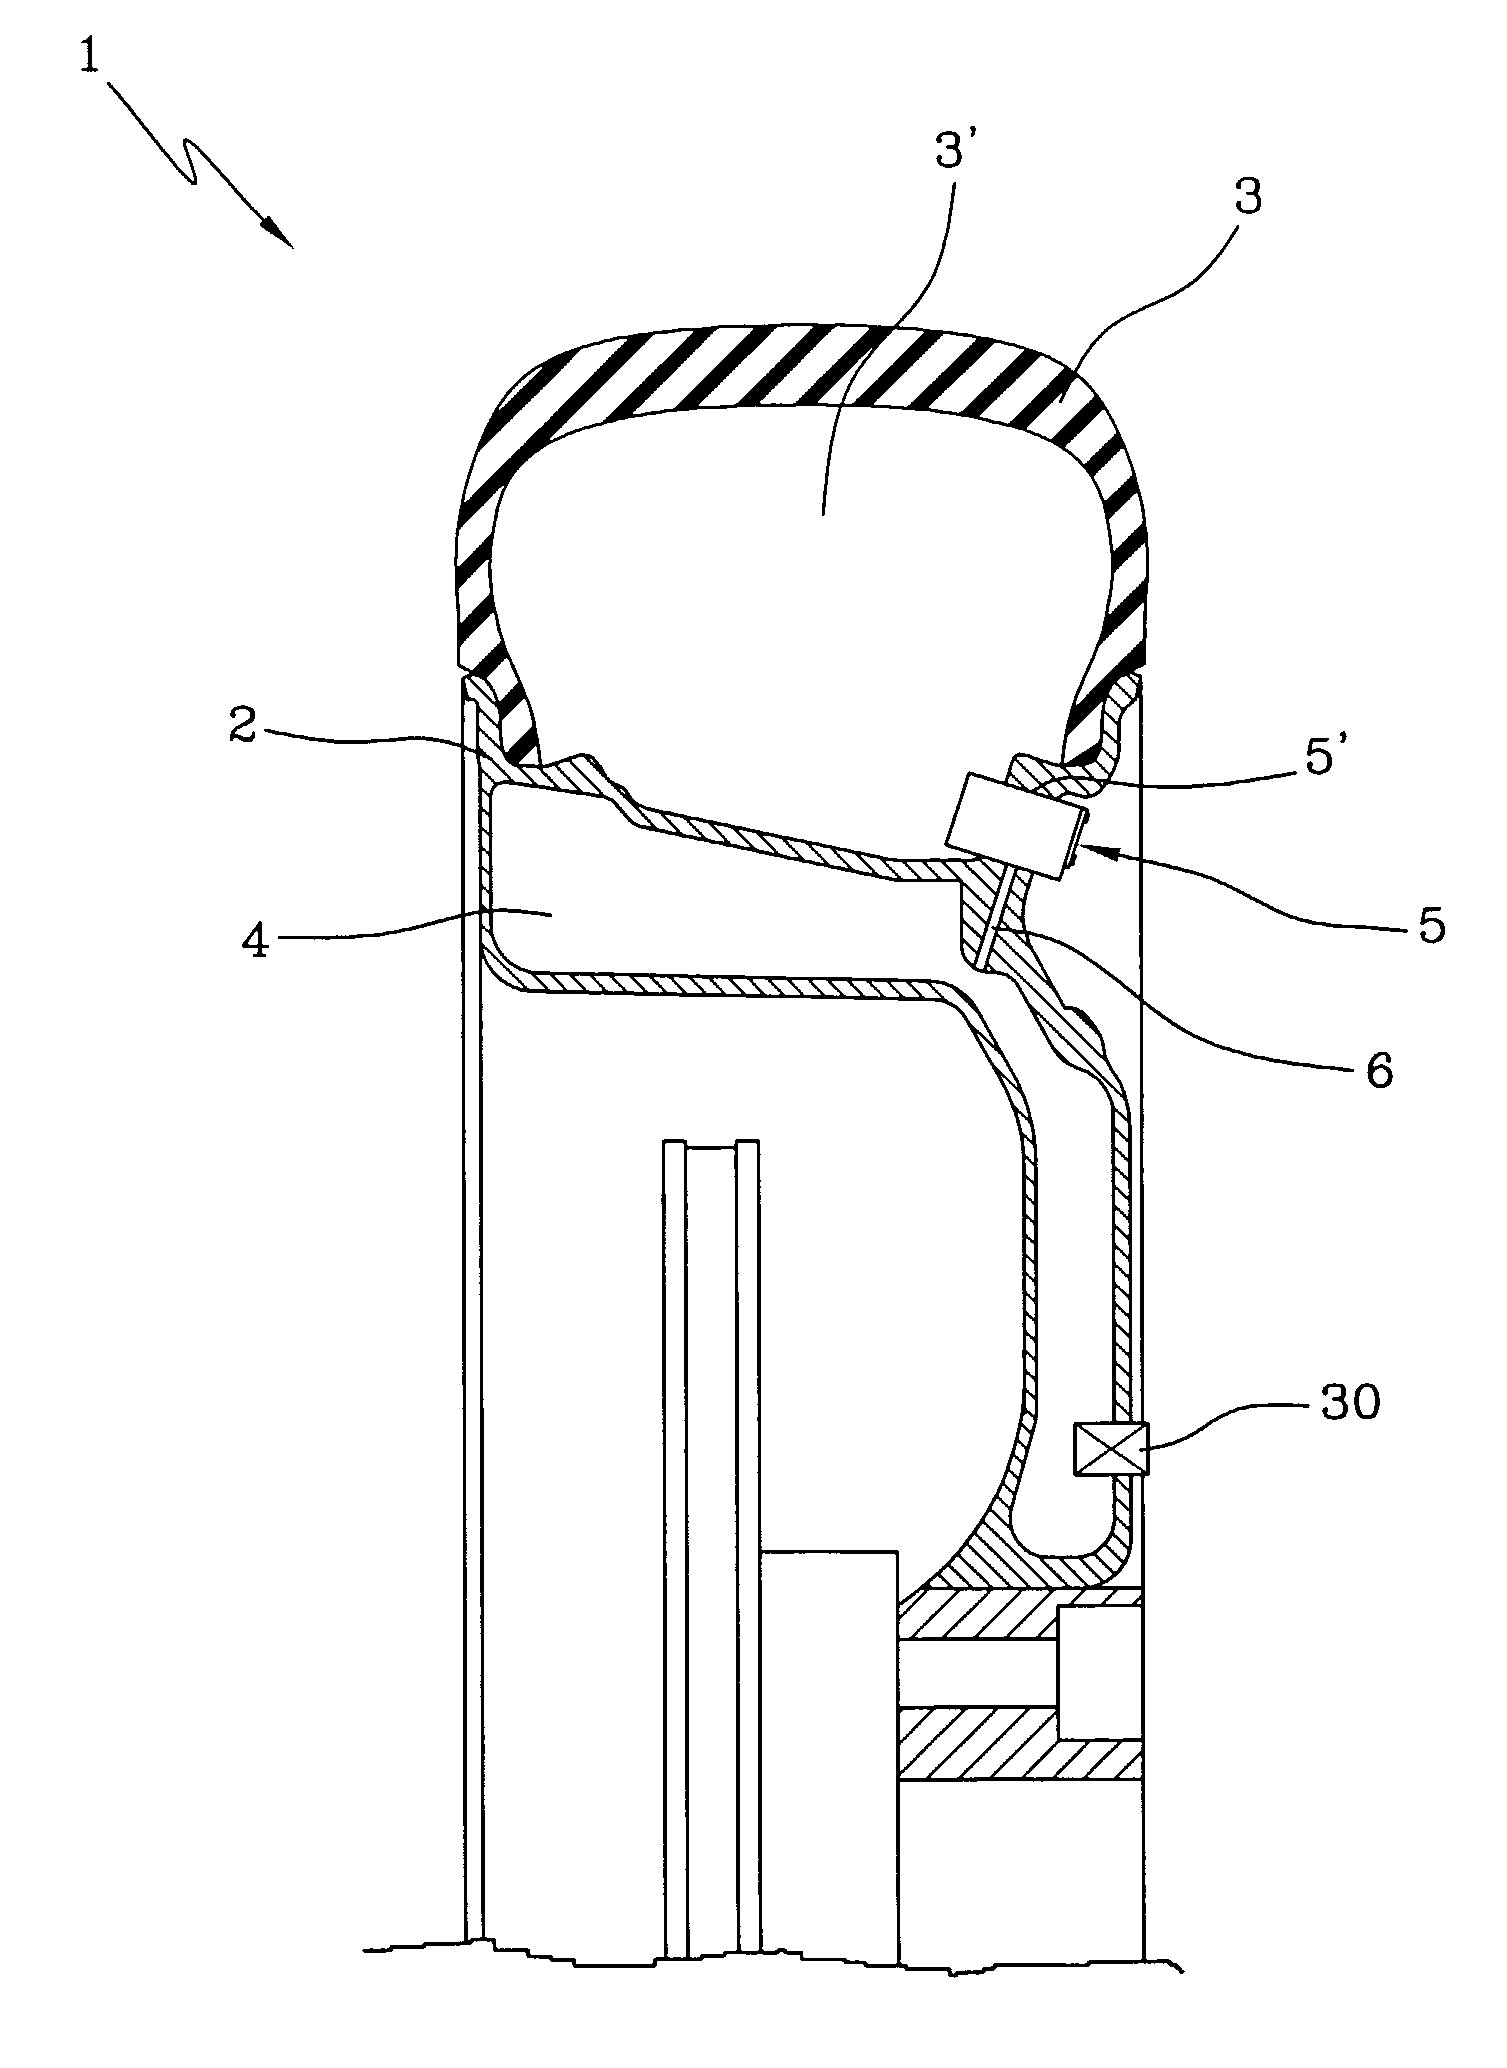 Wheel having a controlled pressure and a pressure reservoir